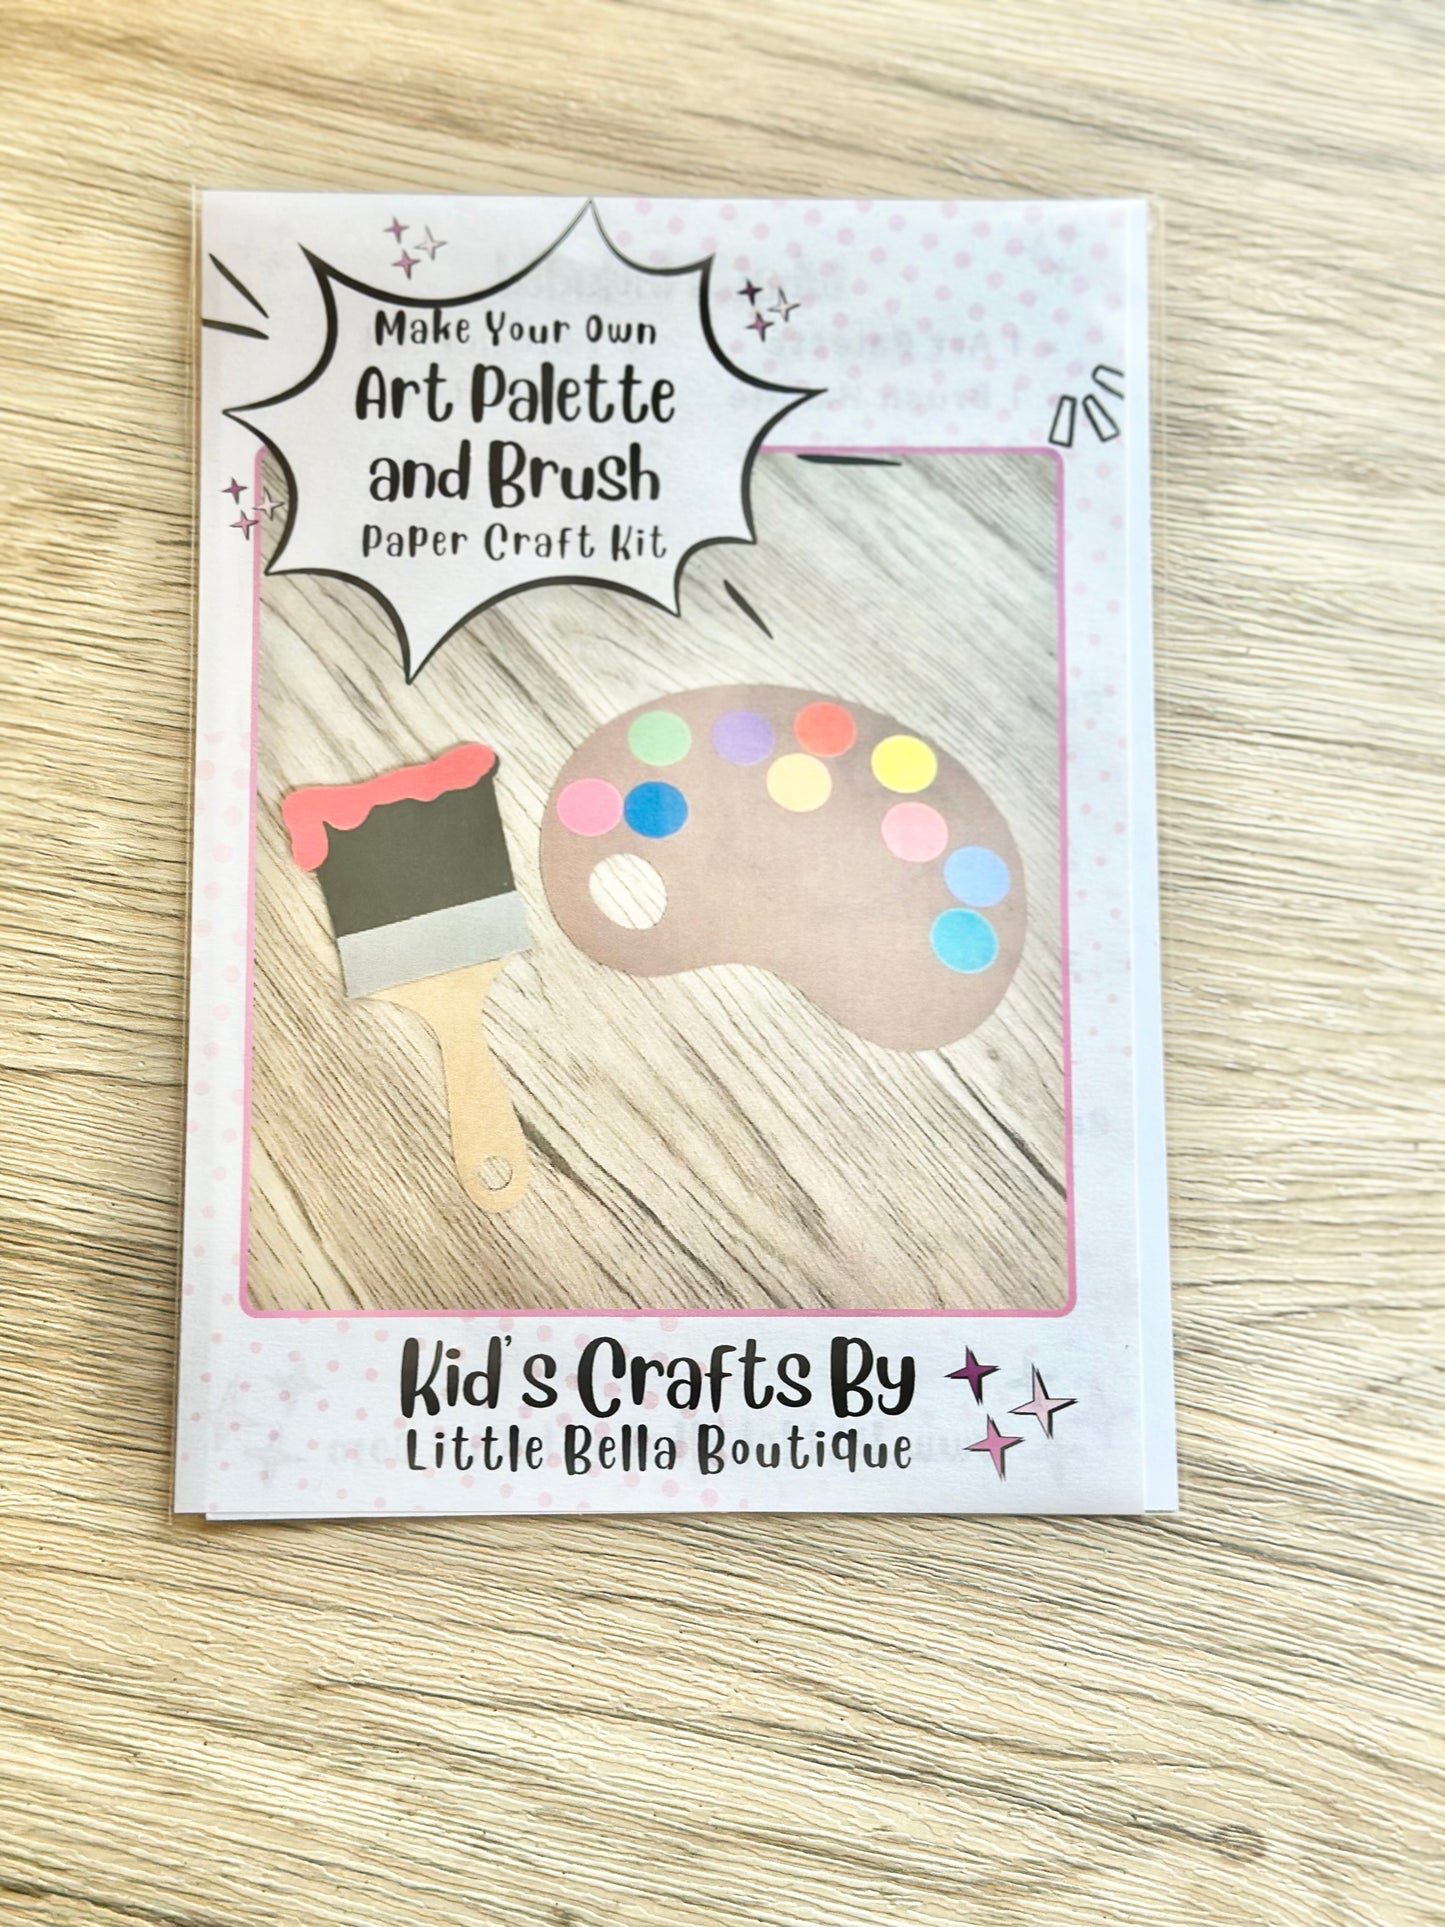 Dollar Deals: Make Your Own Art Palette and Brush Paper Craft Kit